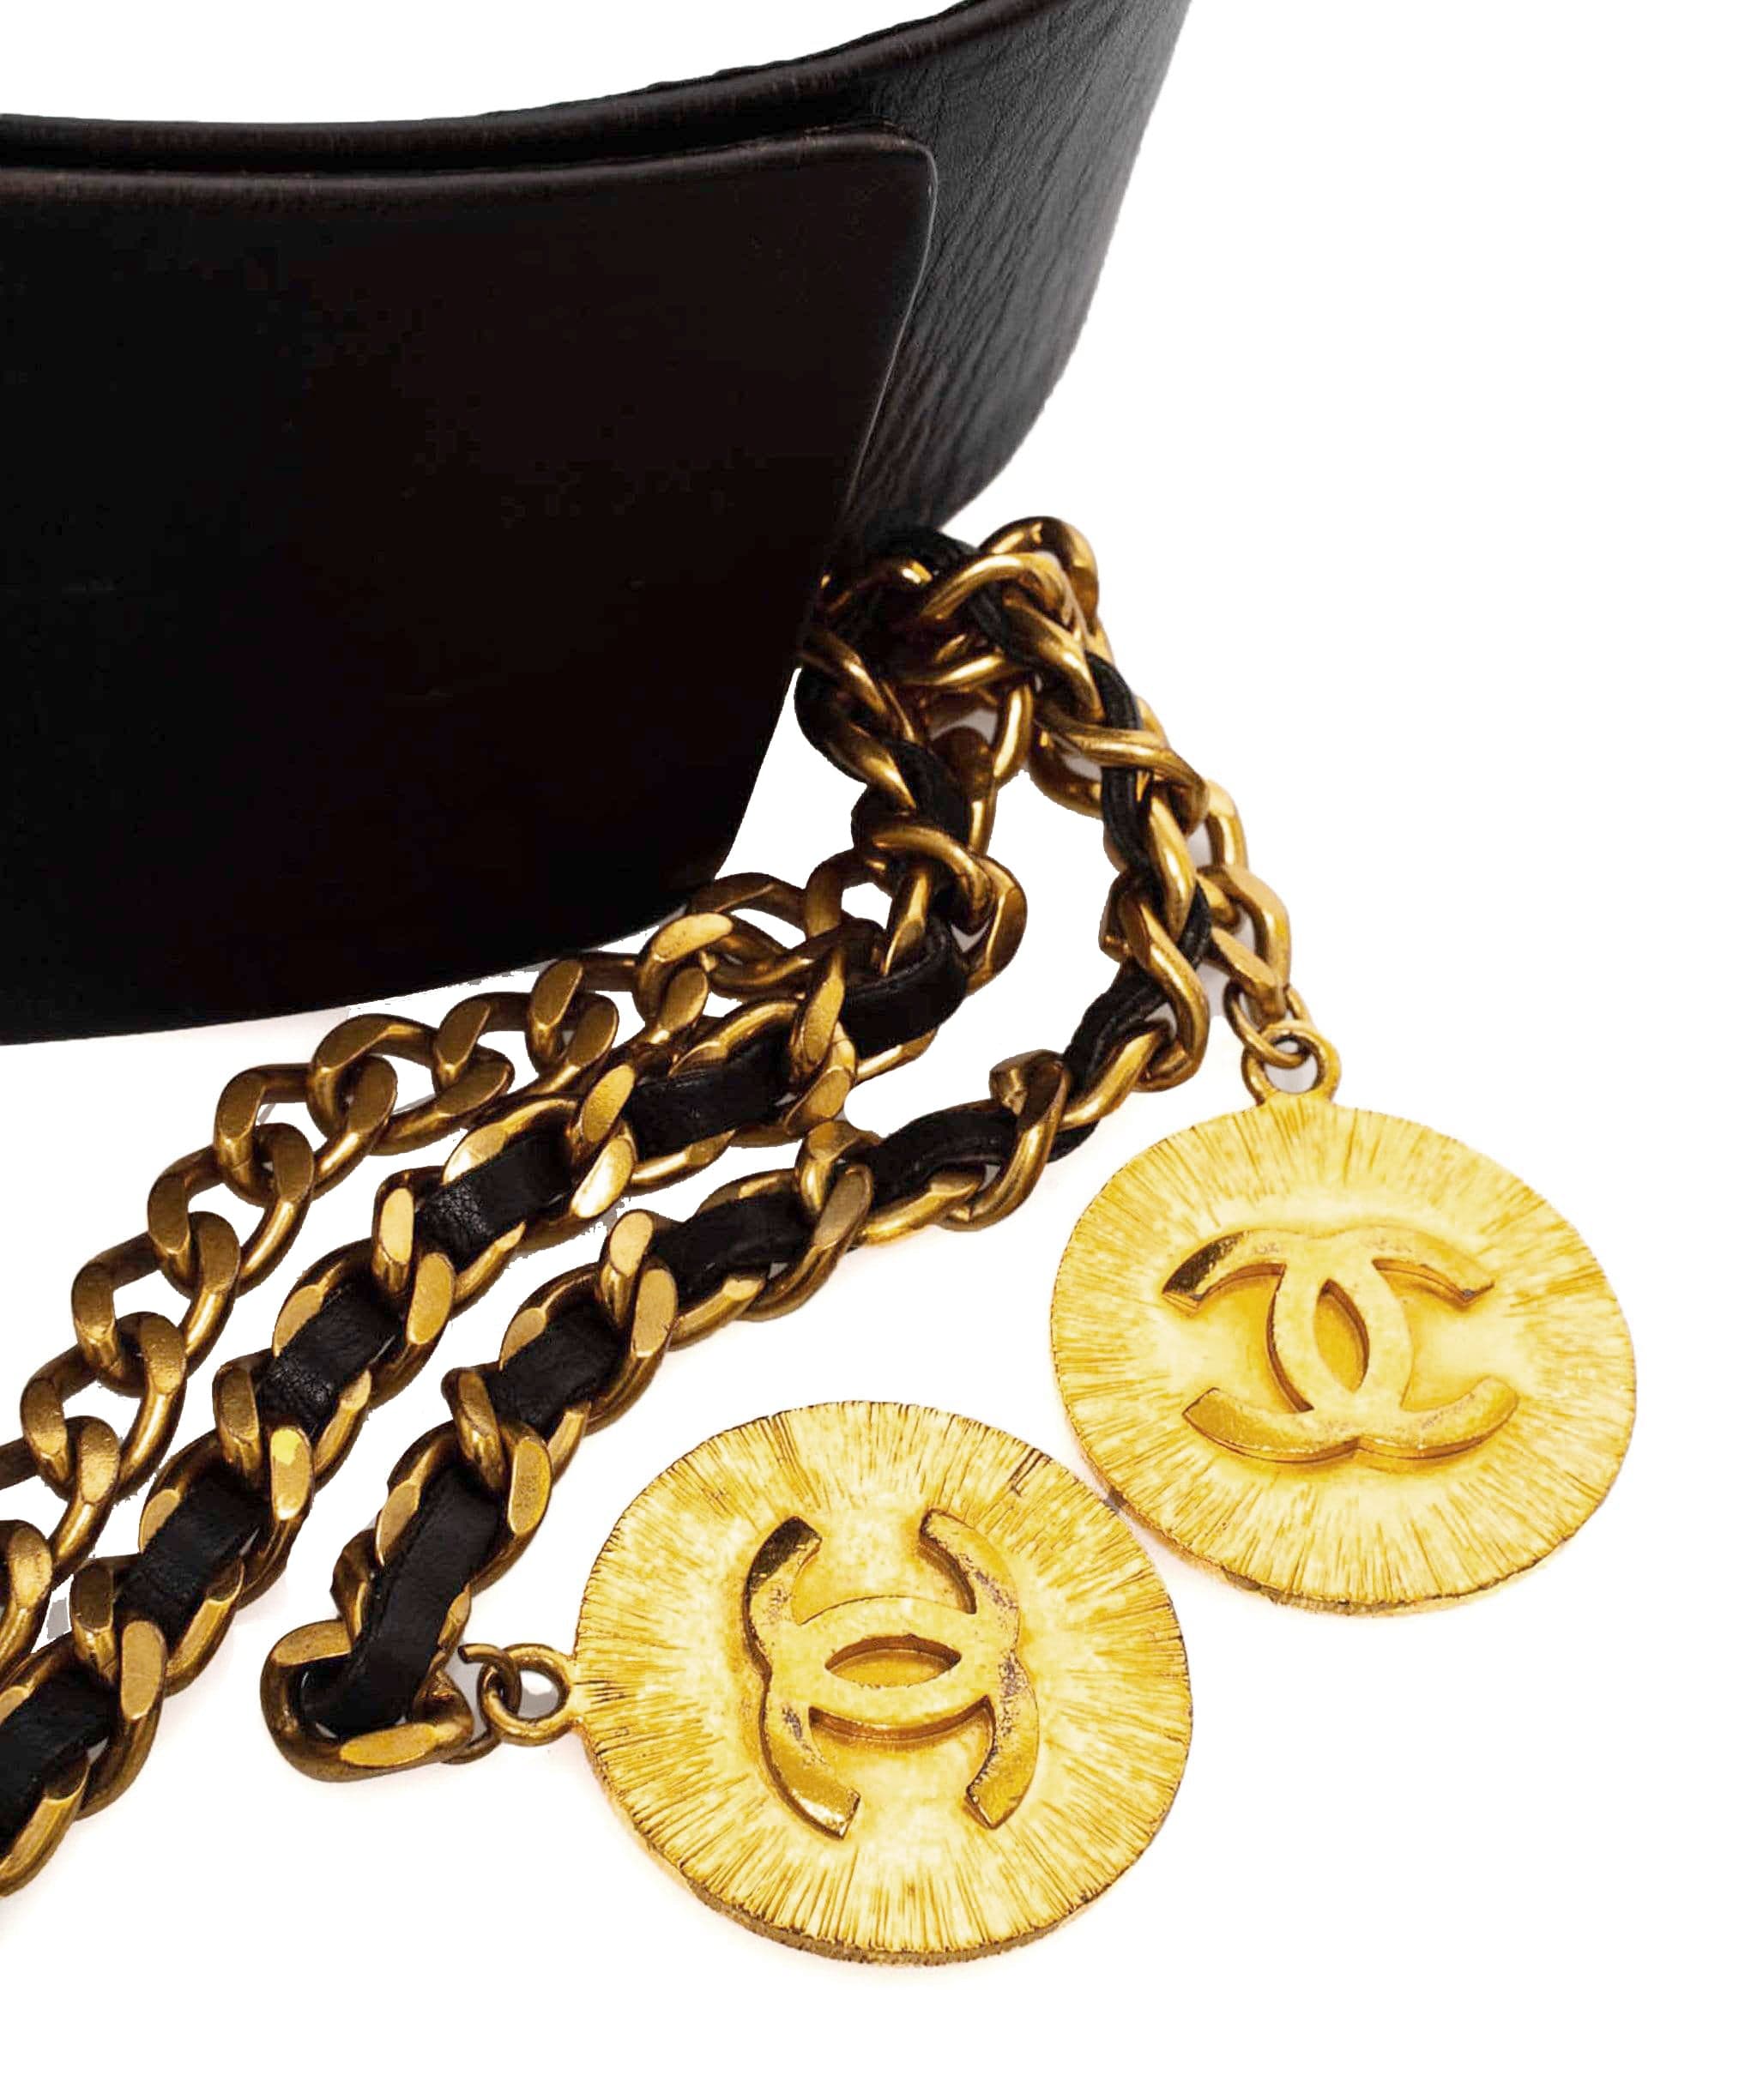 Chanel Chanel Vintage Wide Leather Belt with CC Medallion Chains - AWL2055